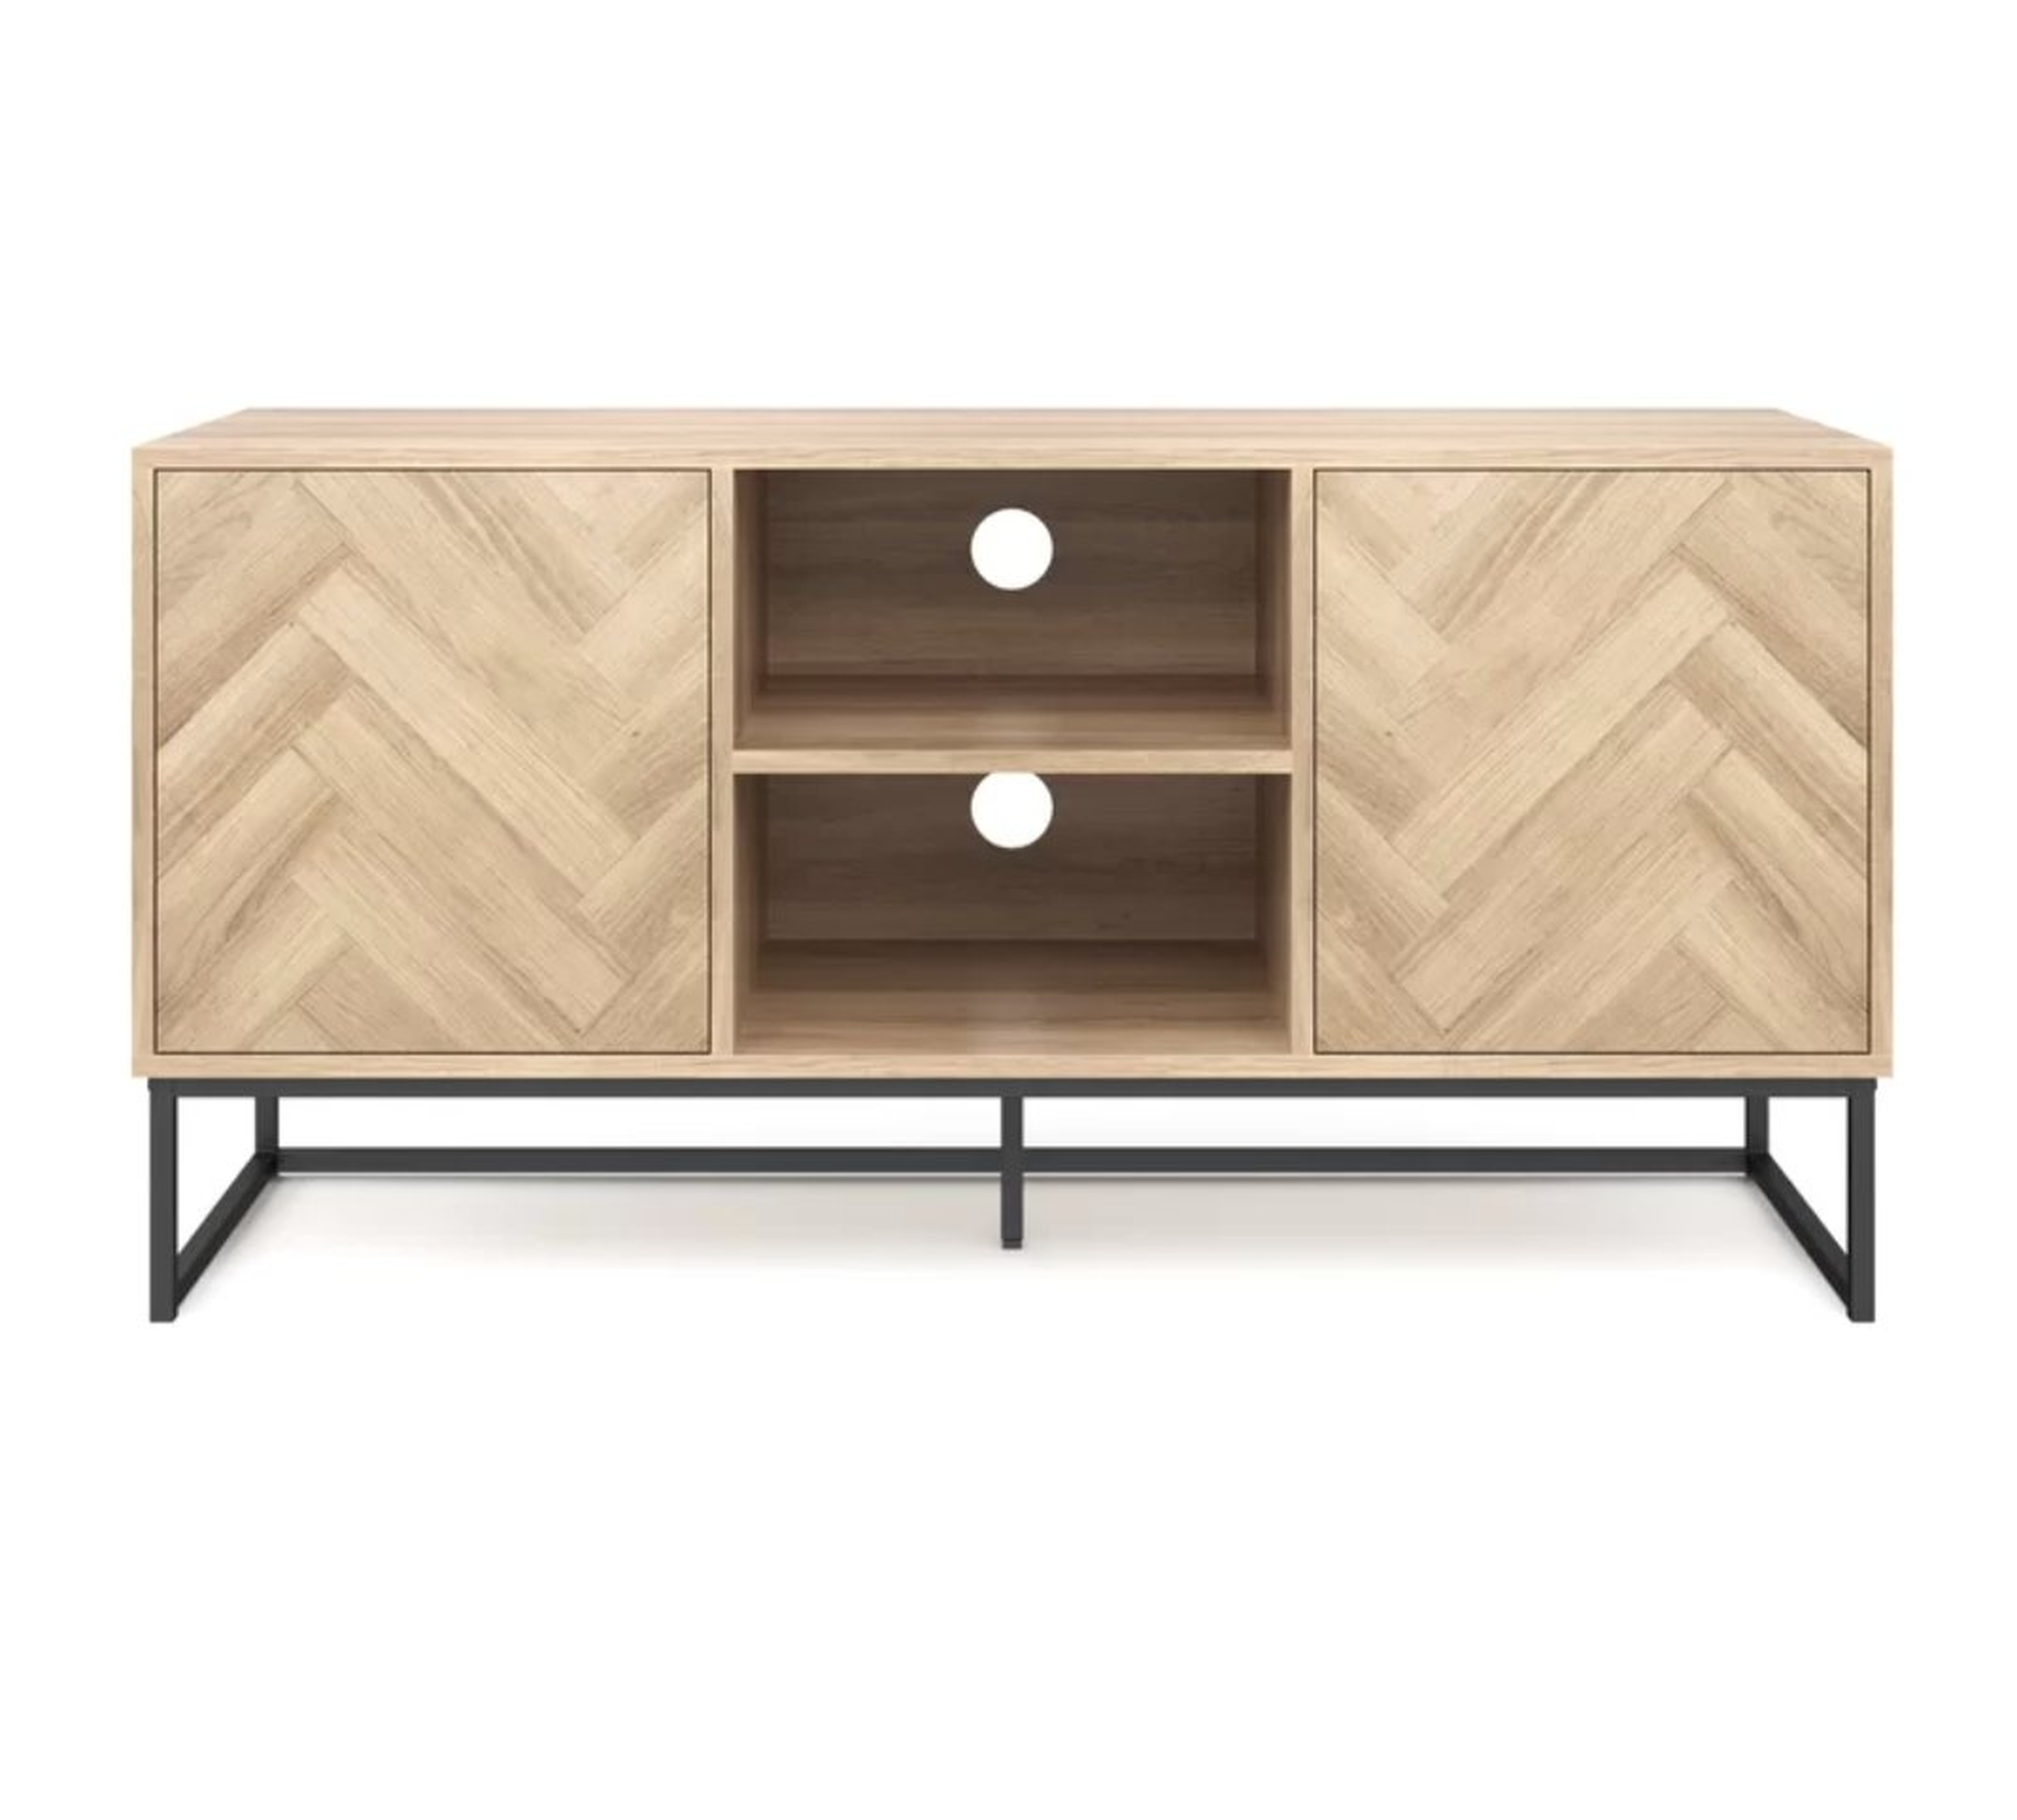 Stemple TV Stand for TVs up to 50" - Wayfair